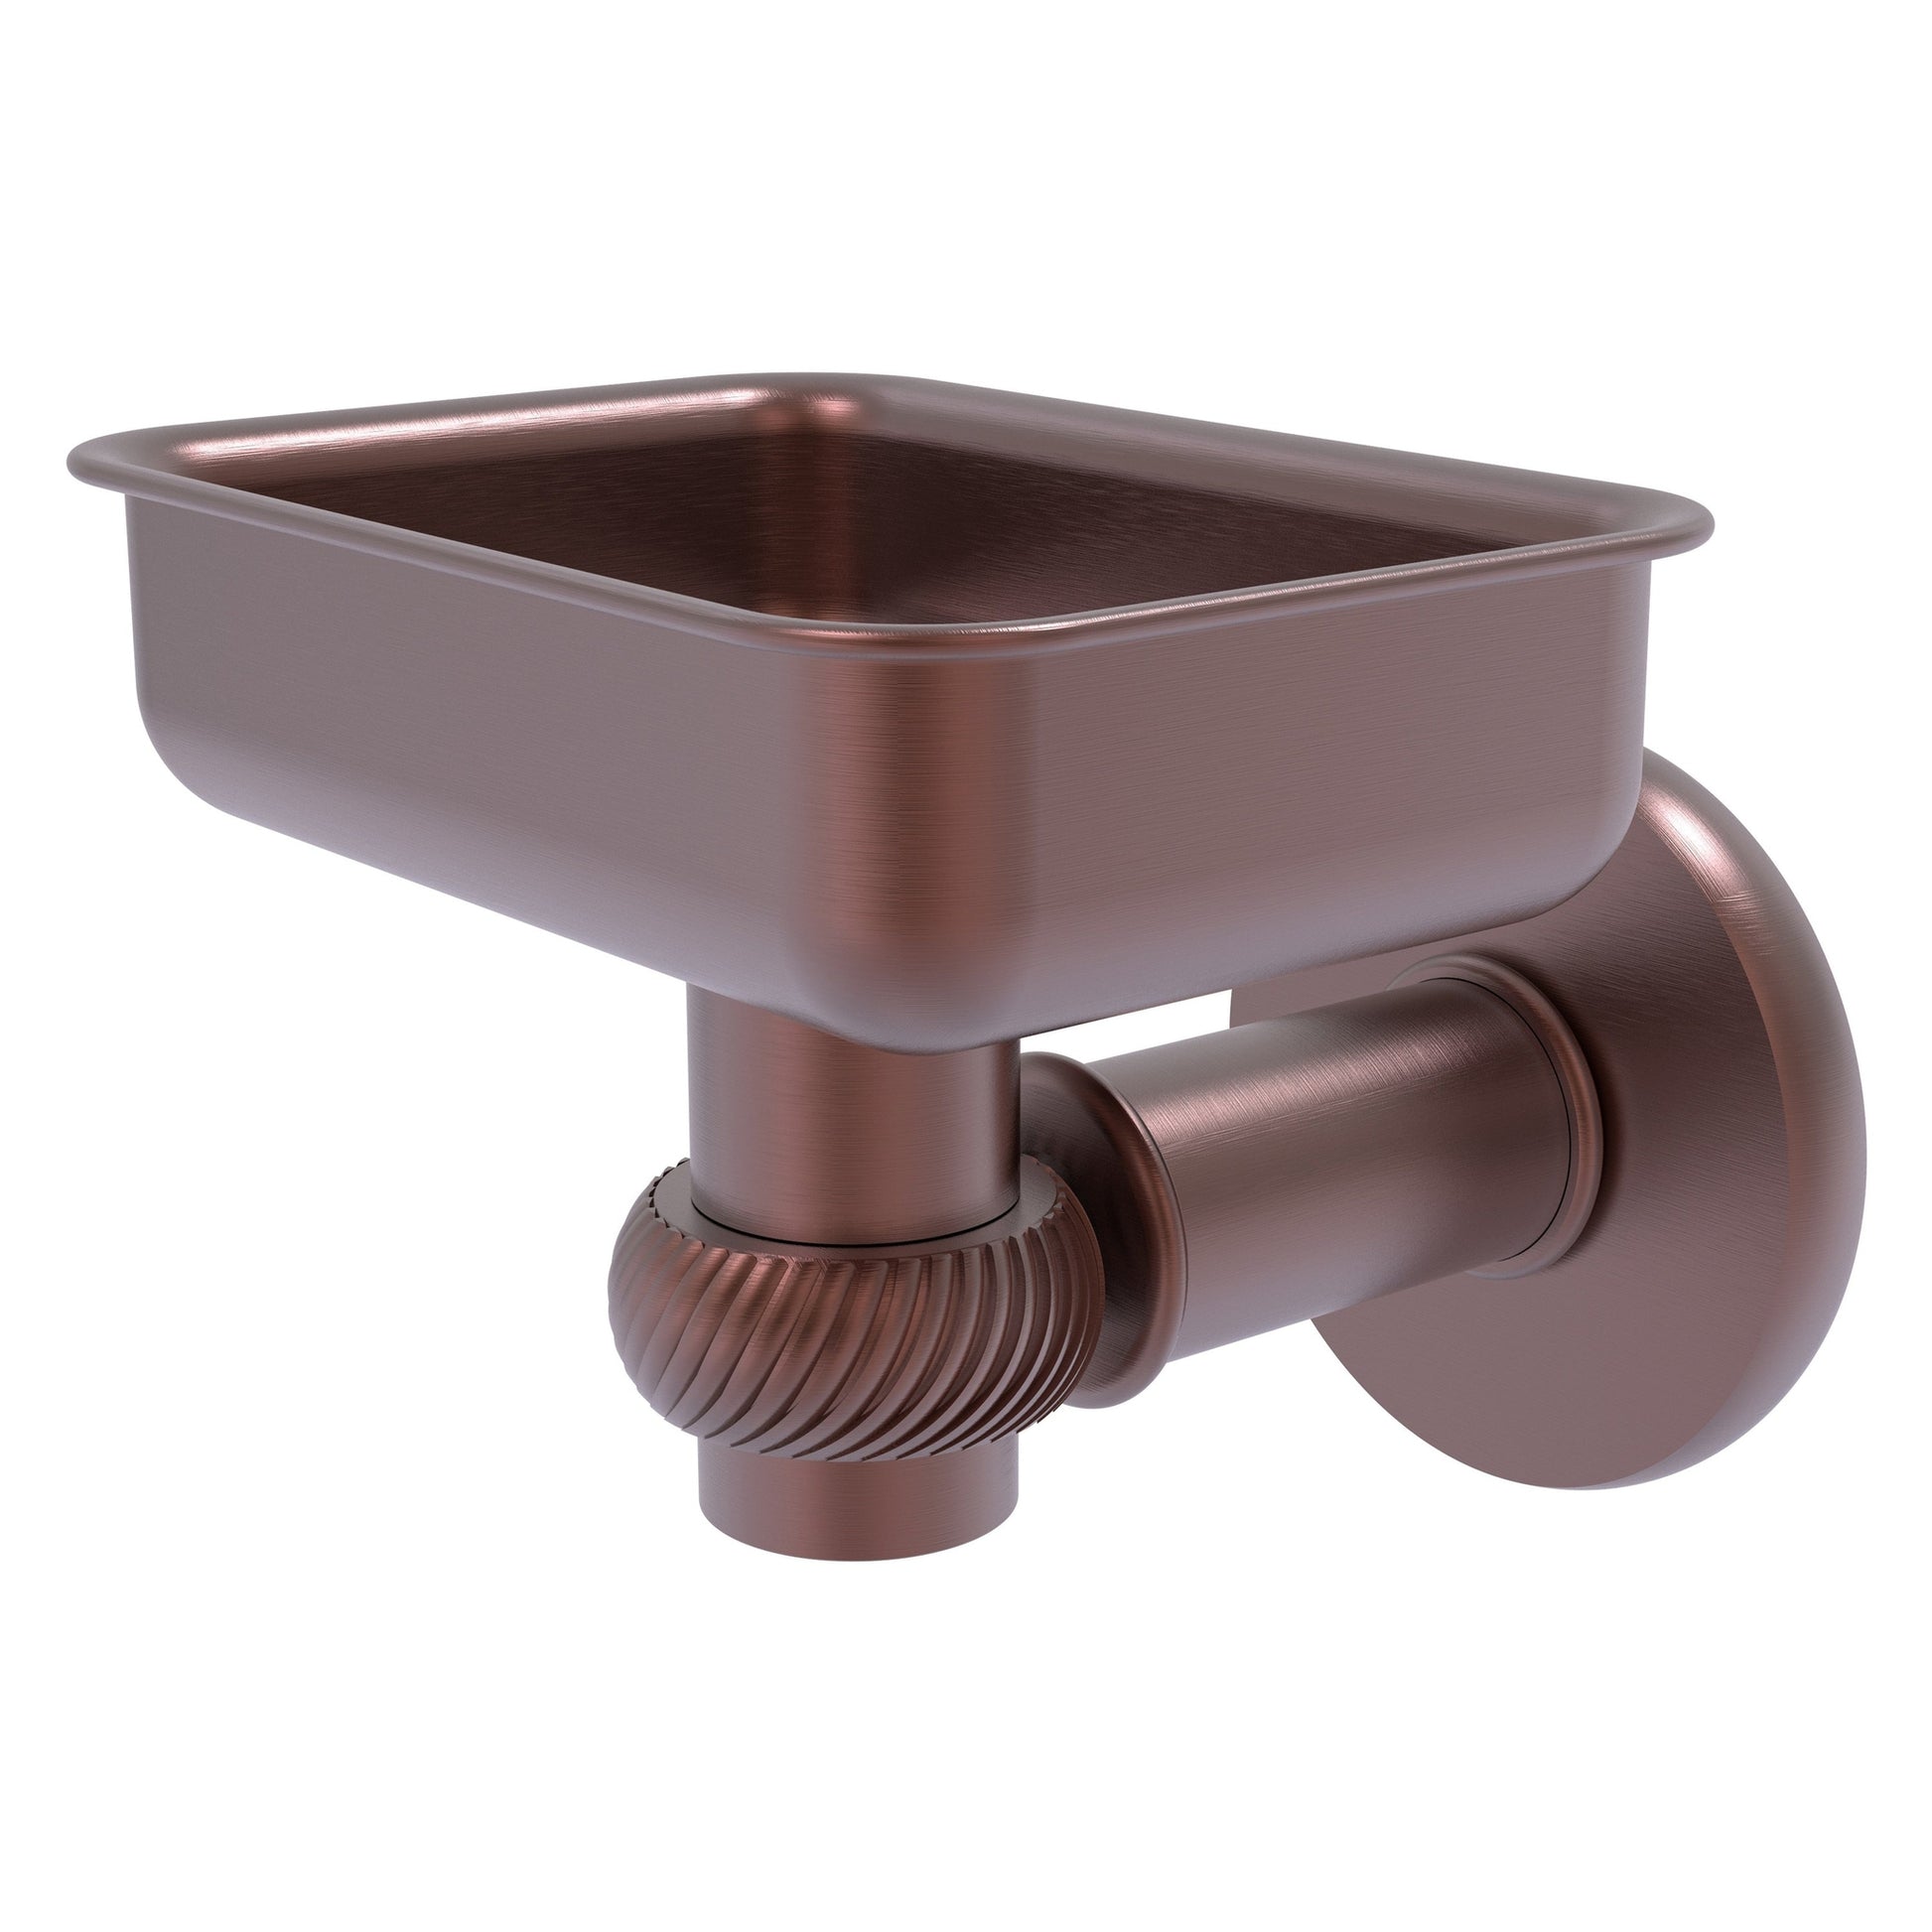 Allied Brass Continental 4.5" x 3.5" Antique Copper Solid Brass Wall-Mounted Soap Dish Holder with Twist Accents